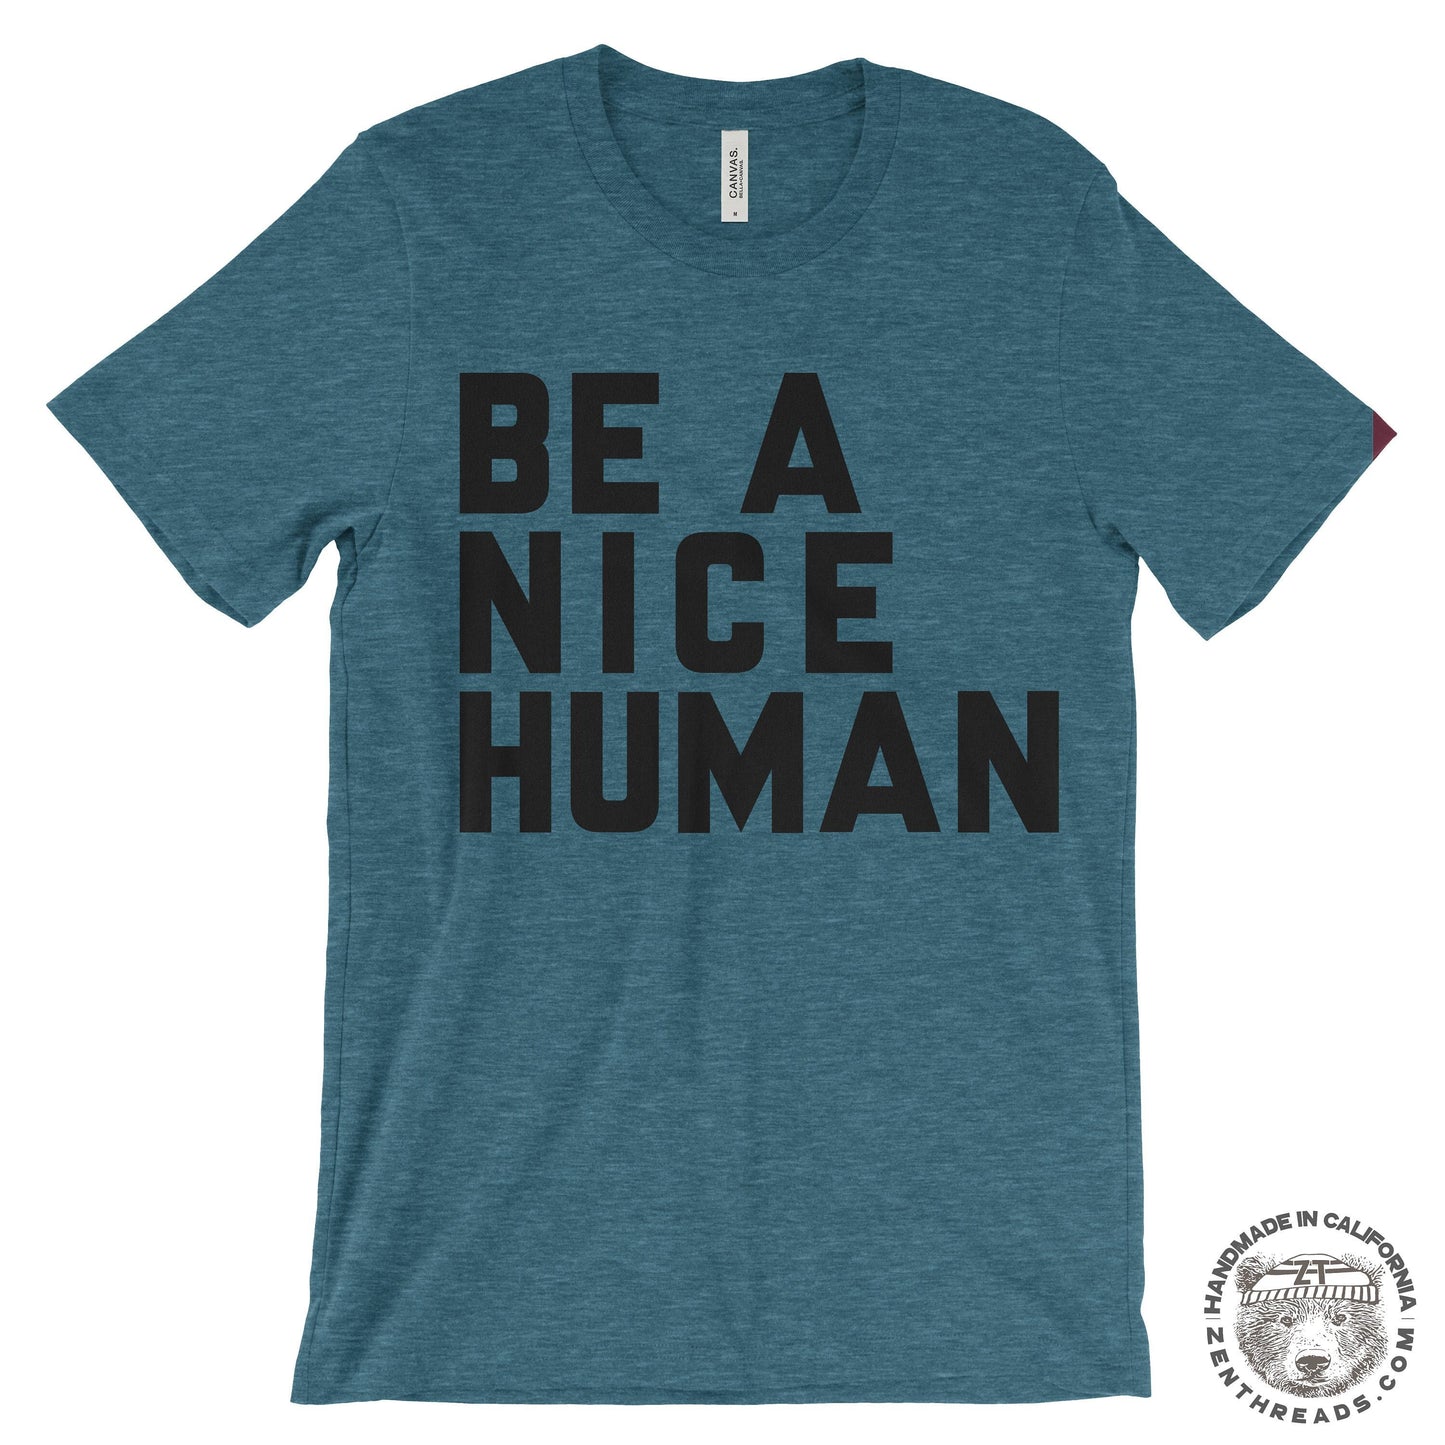 BE A NICE HUMAN unisex men's t-shirt kindness Zen Threads custom color bella canvas sustainable eco printed be kind tee tee quote